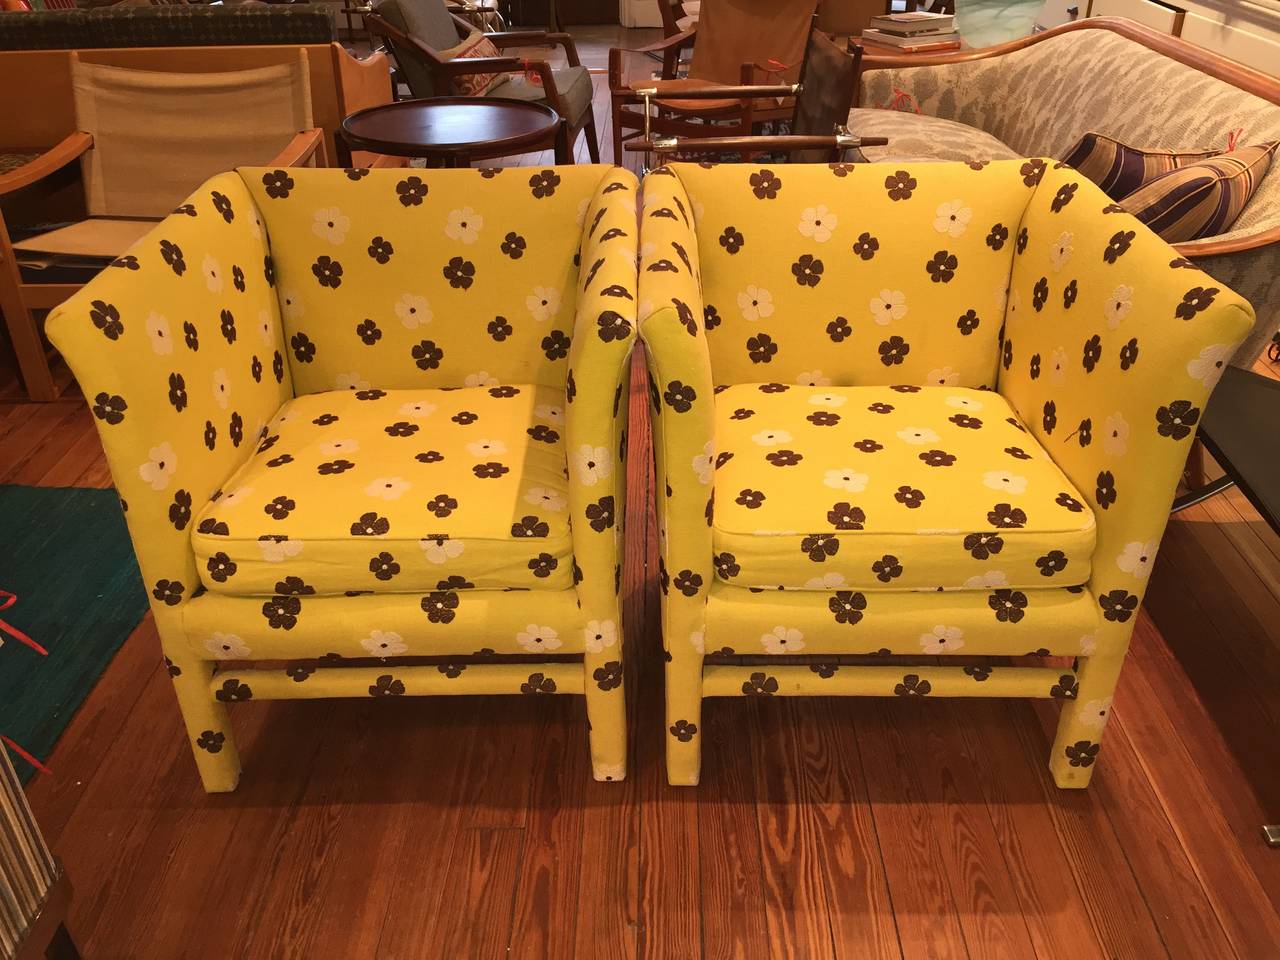 Fabulously fun original whimsical embroidered flower upholstery club chairs. Fine custom craftsmanship by Century Furniture.